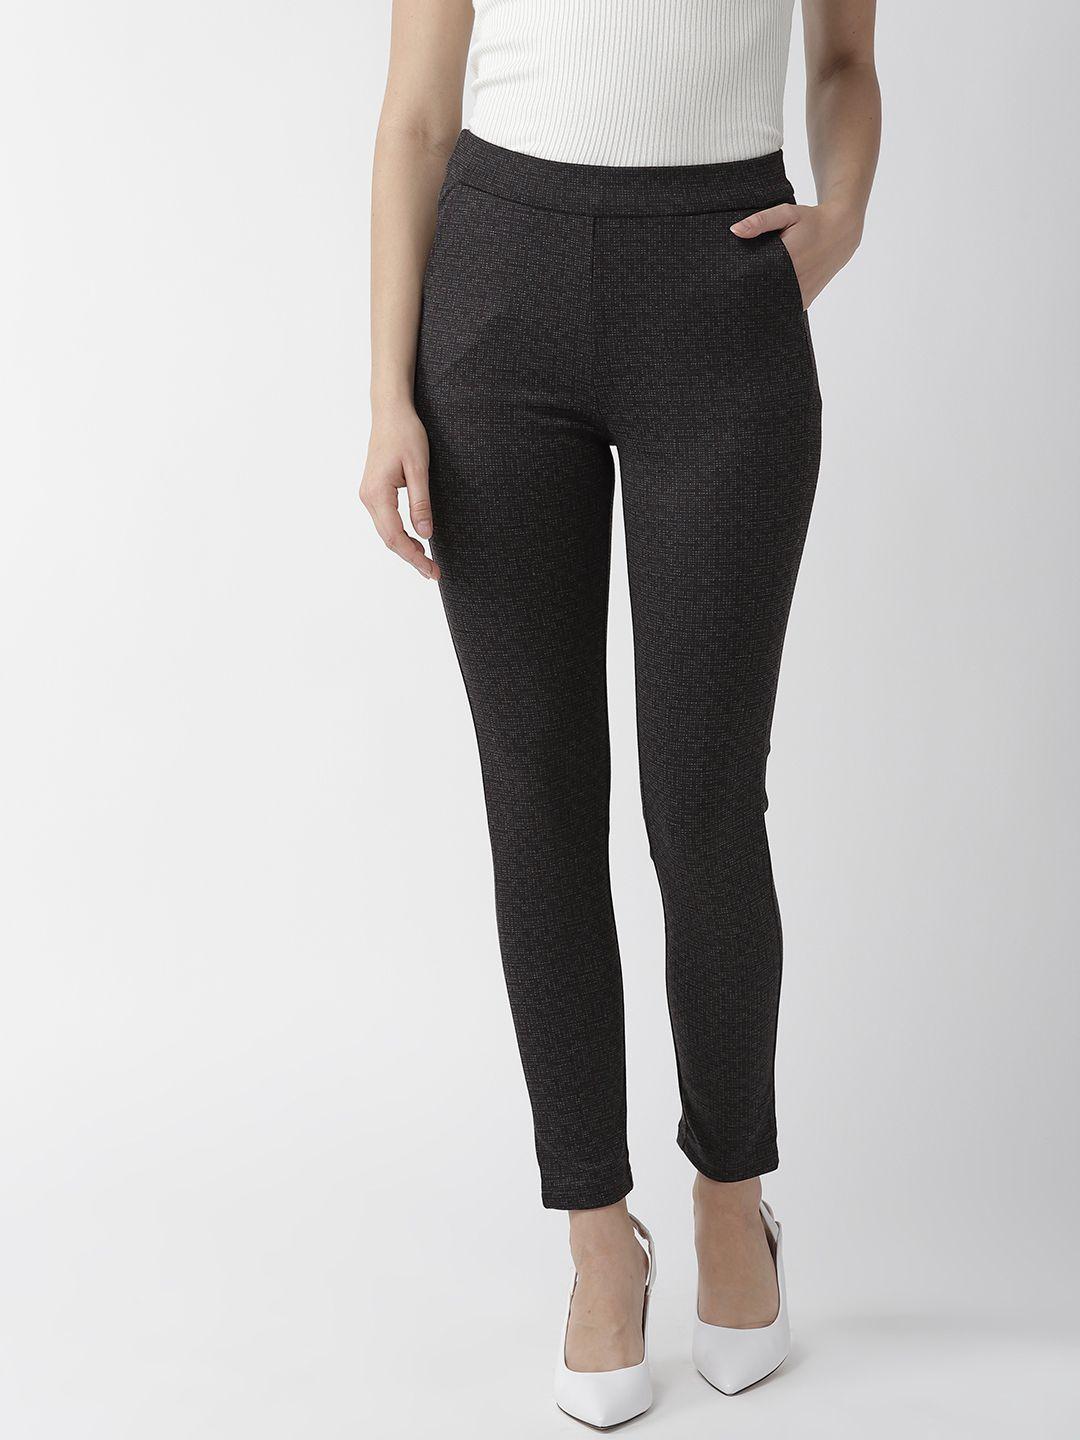 xpose-women-coffee-brown-self-checked-high-rise-skinny-fit-treggings